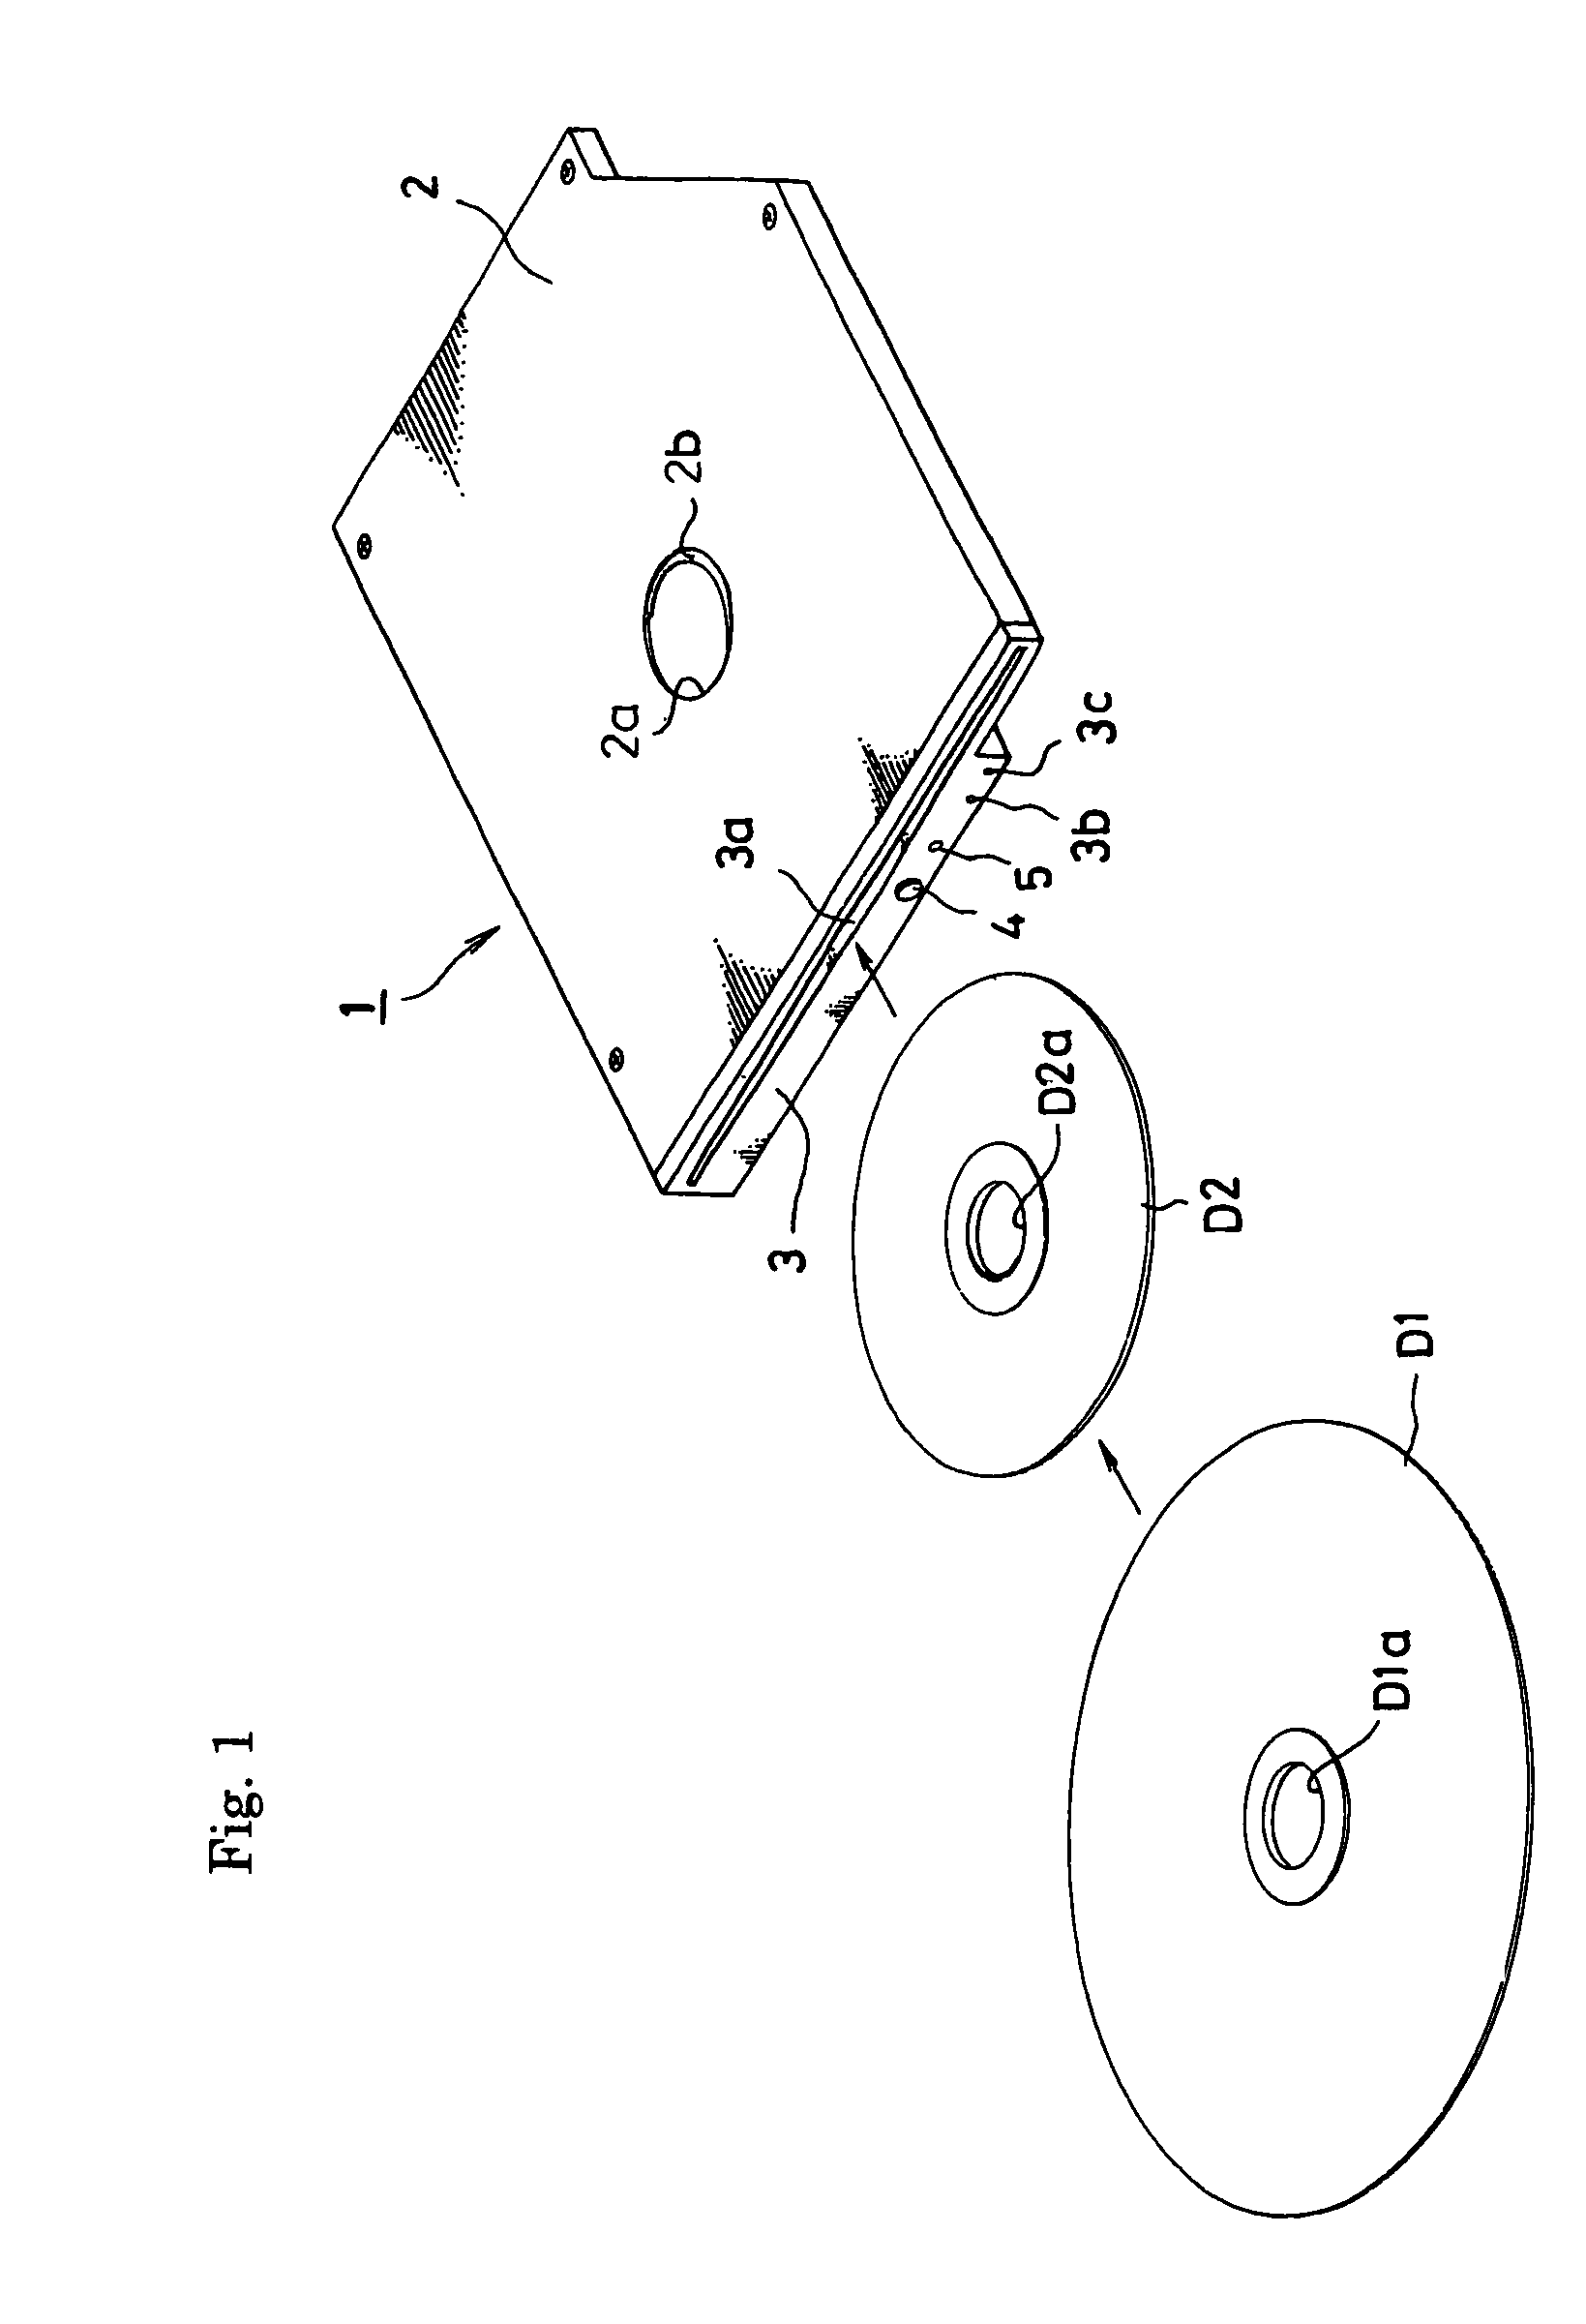 Disc device with shutter to block insertion of a disk